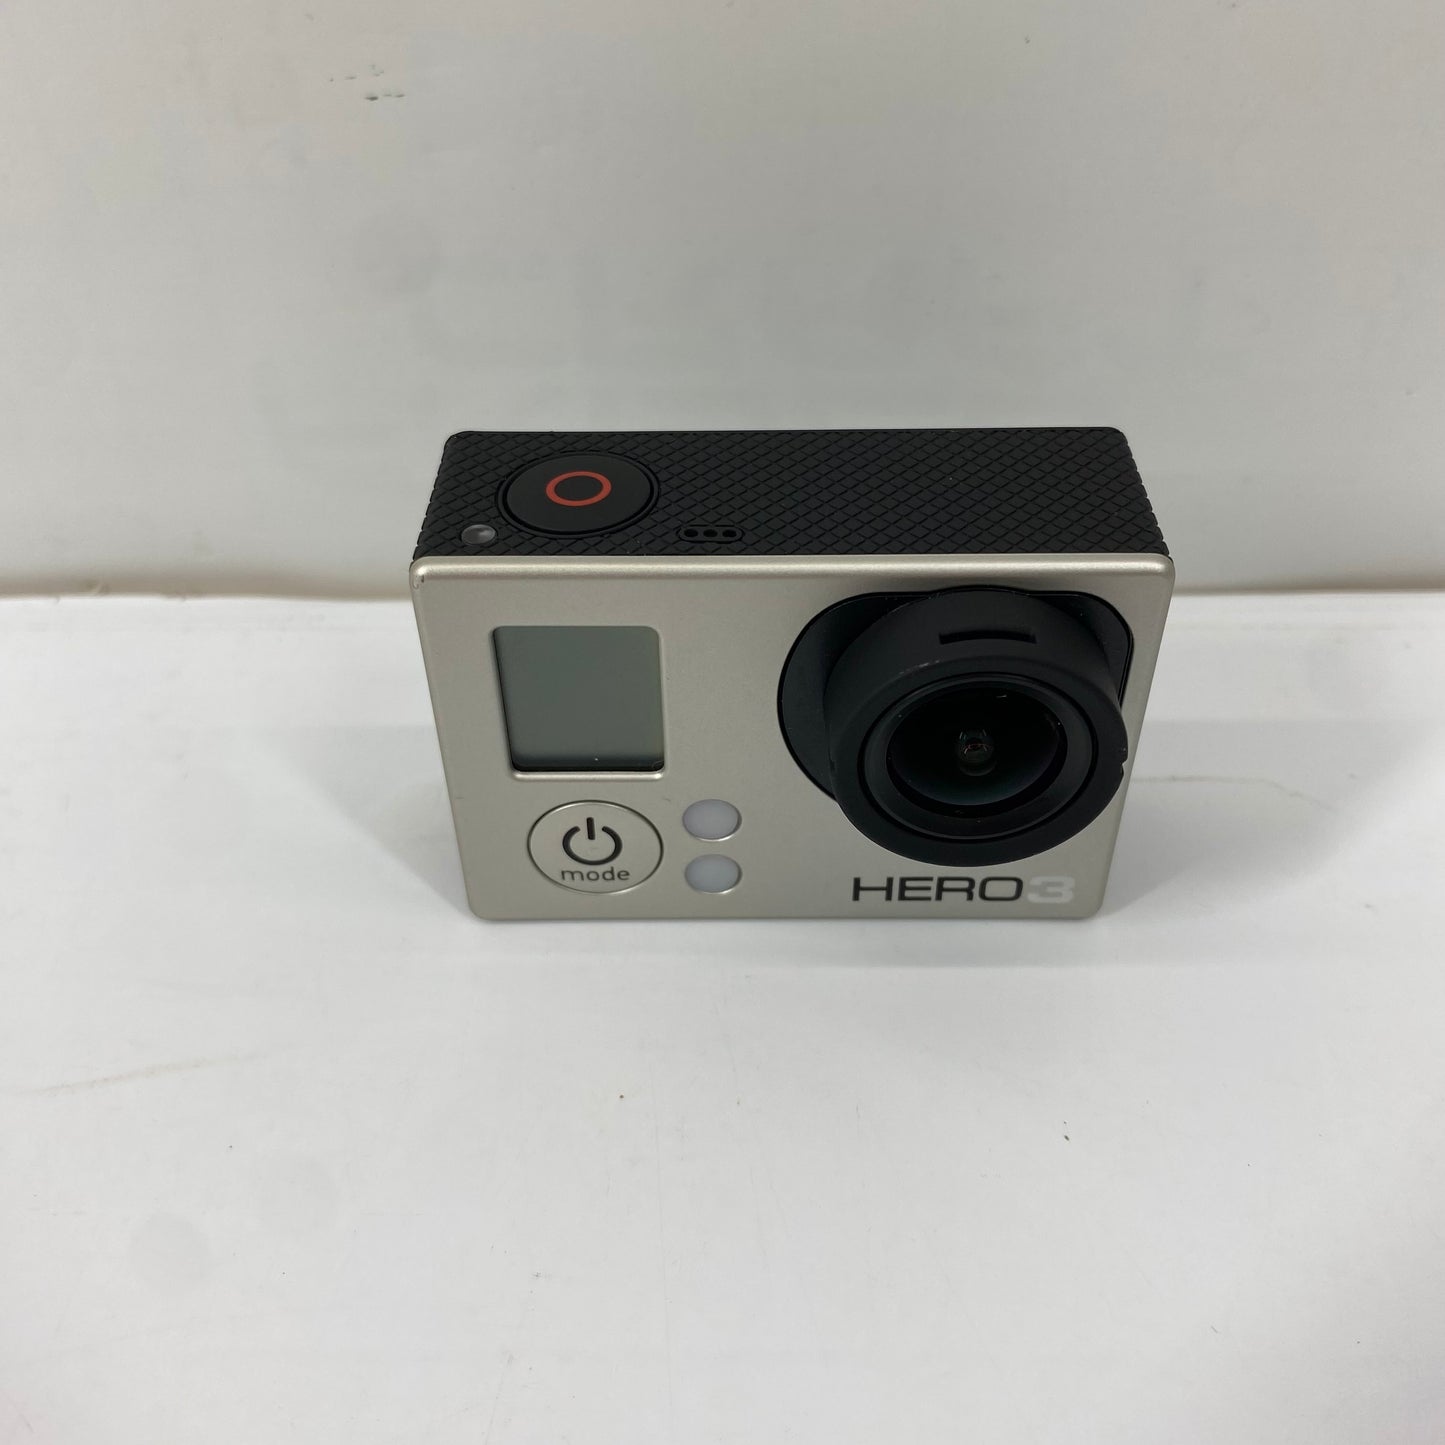 GoPro Hero3 Silver 11MP Waterproof Action Camera CHDHE-301 with Stabilizer